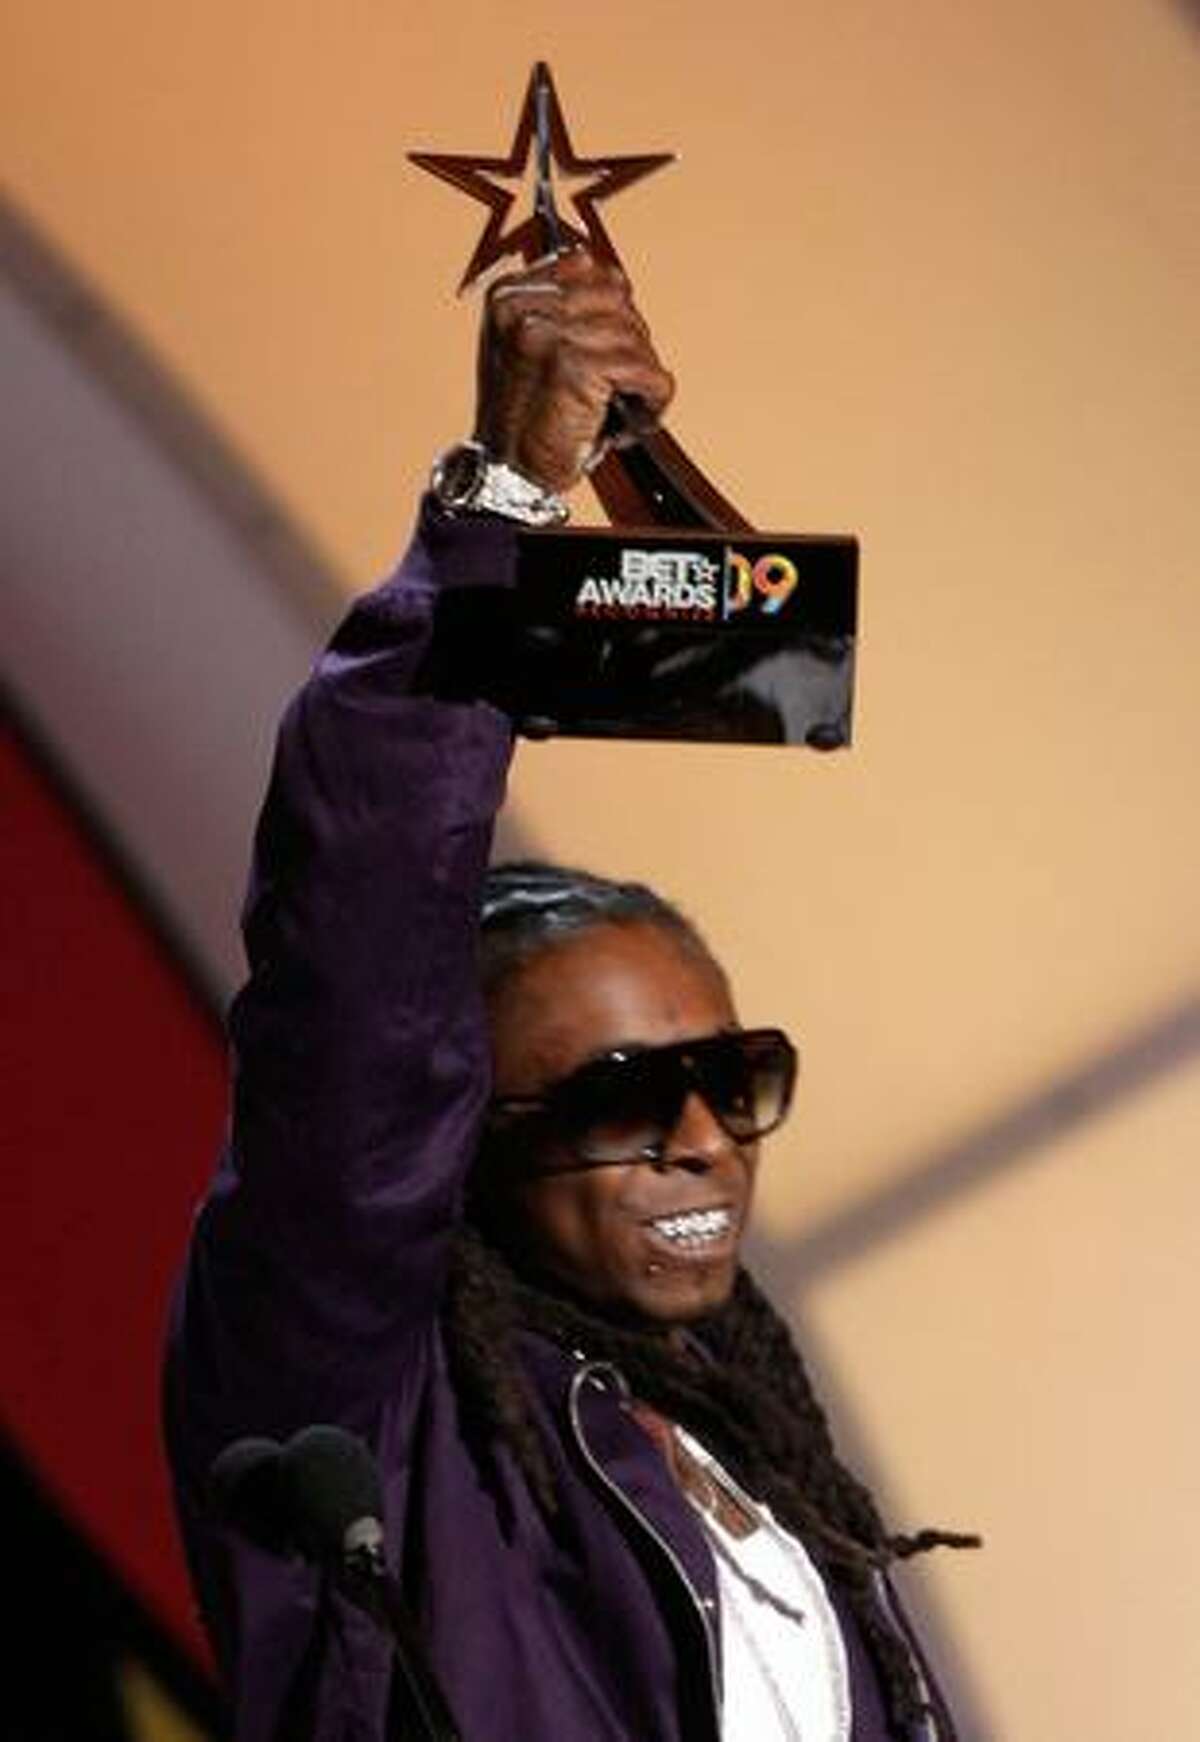 Rapper Lil' Wayne accepts the Best Male Hip-Hop Artist award on stage during the 2009 BET Awards held at the Shrine Auditorium on Sunday in Los Angeles, California.